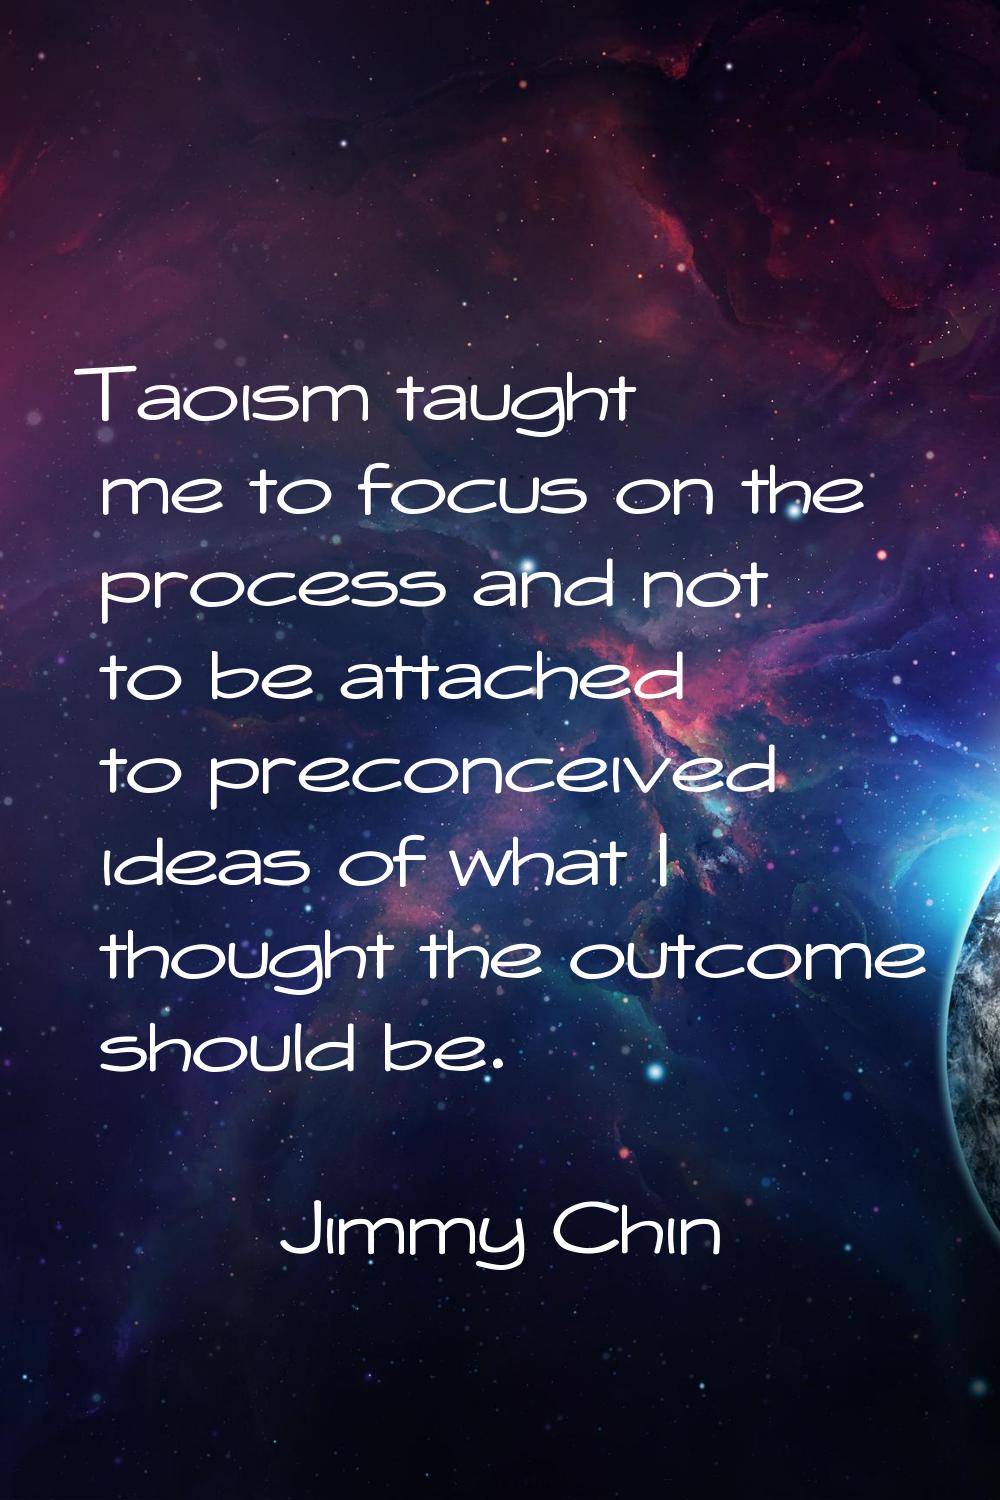 Taoism taught me to focus on the process and not to be attached to preconceived ideas of what I tho